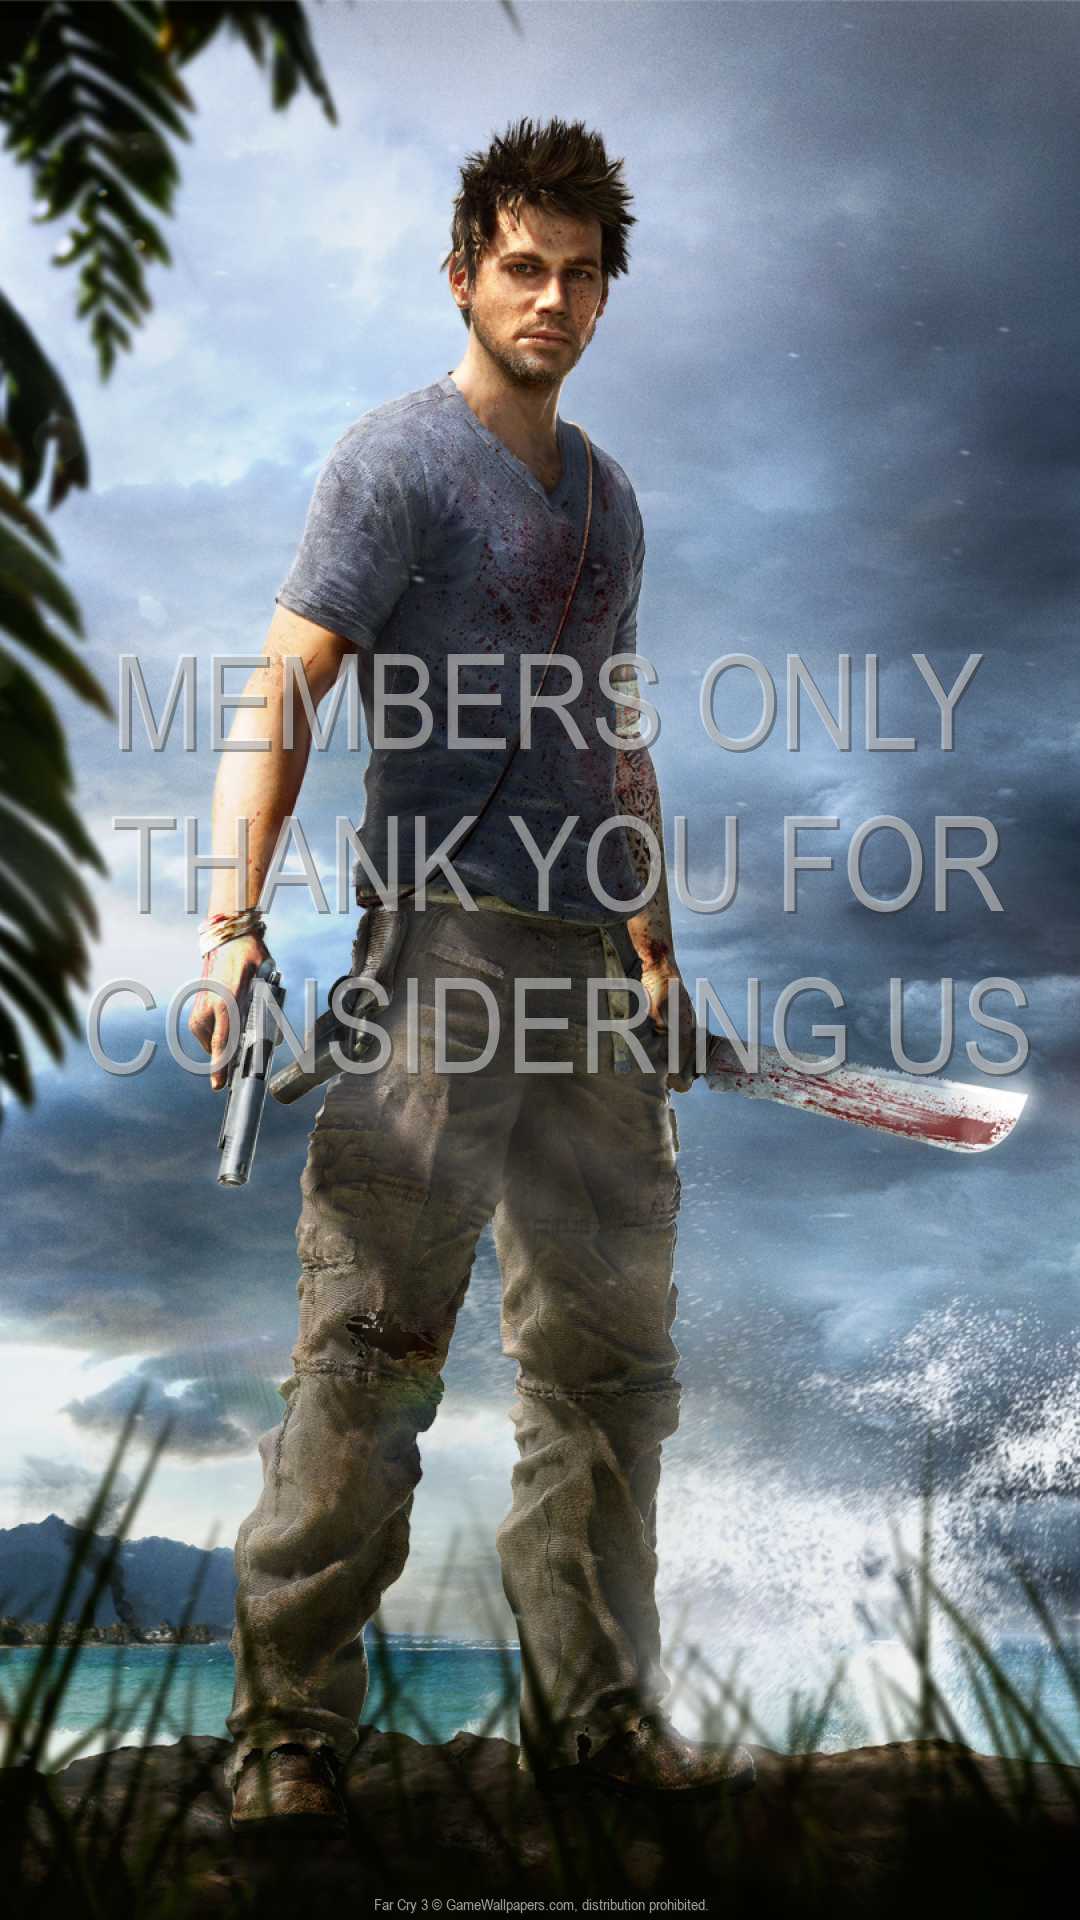 Far Cry 3 1080p%20Vertical Mobile wallpaper or background 09